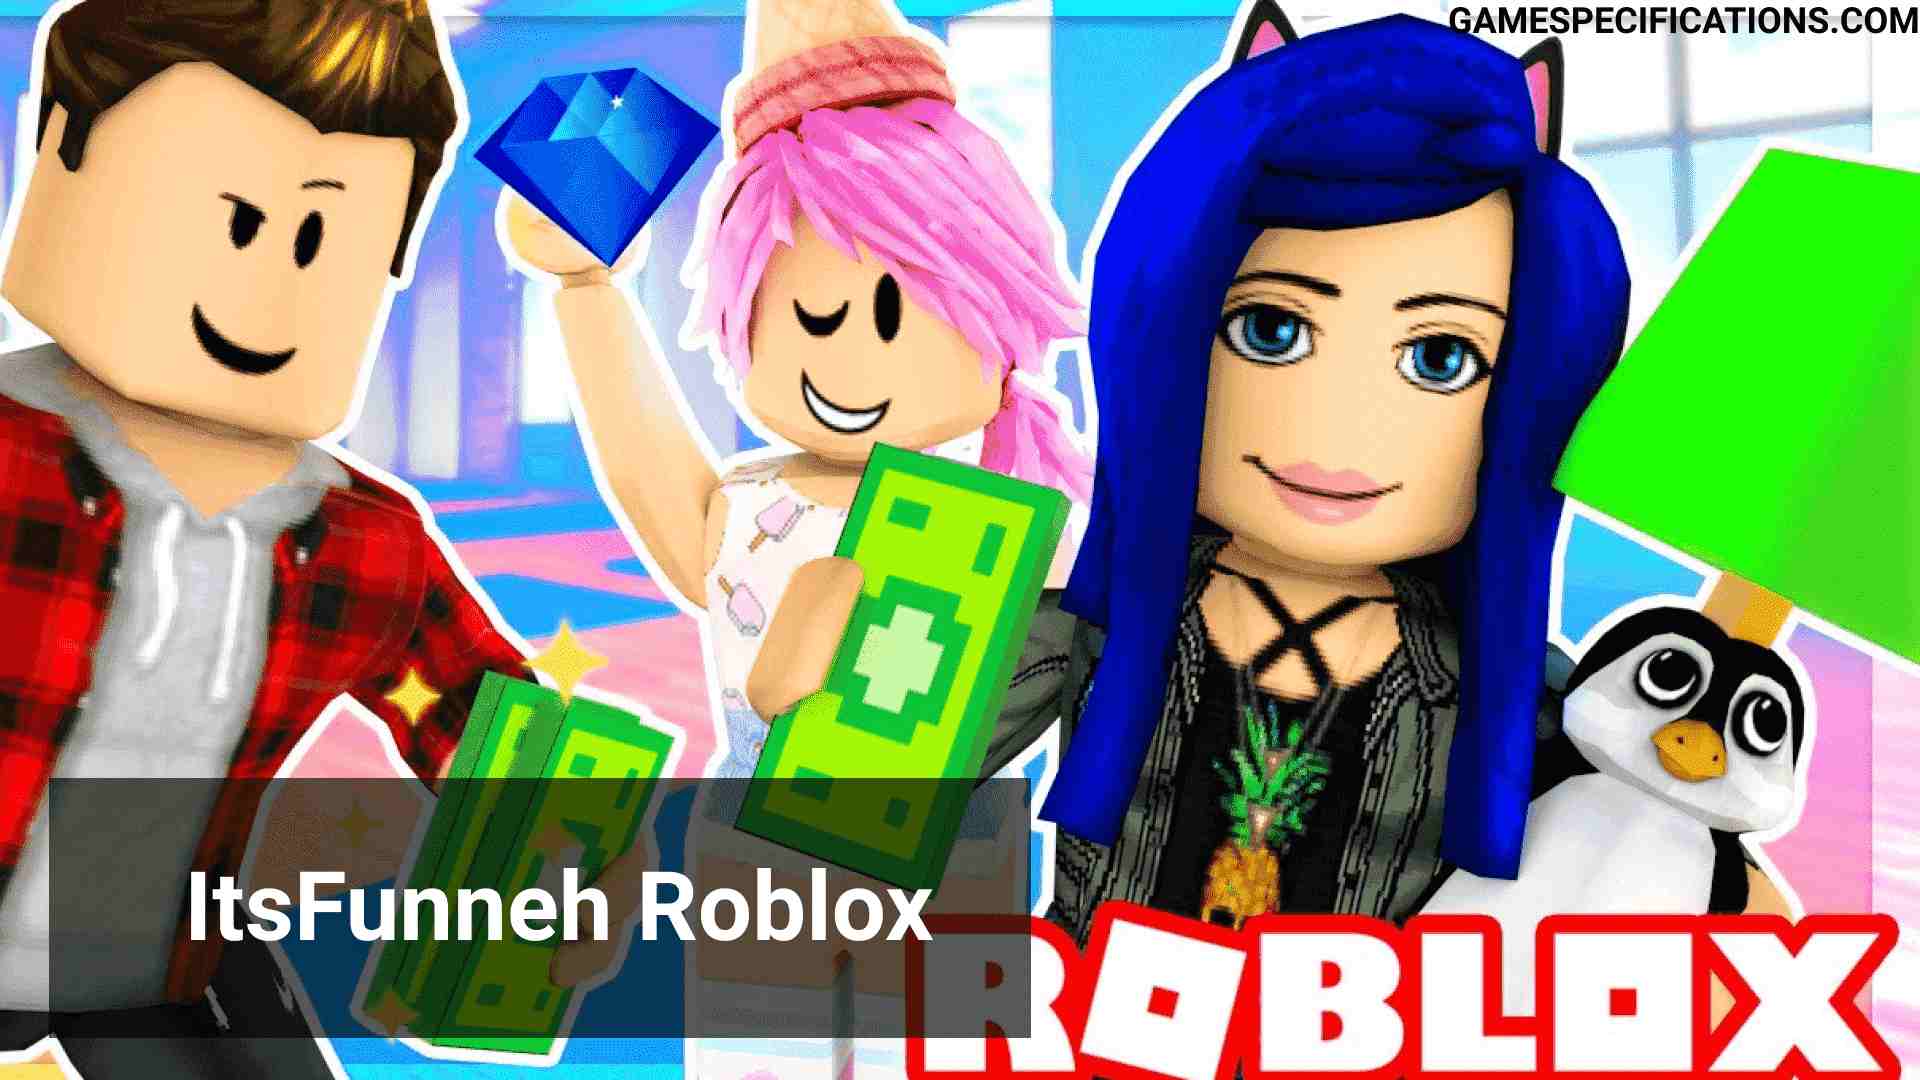 Itsfunneh Roblox Legendary Top Videos Game Specifications - funneh new videos roblox